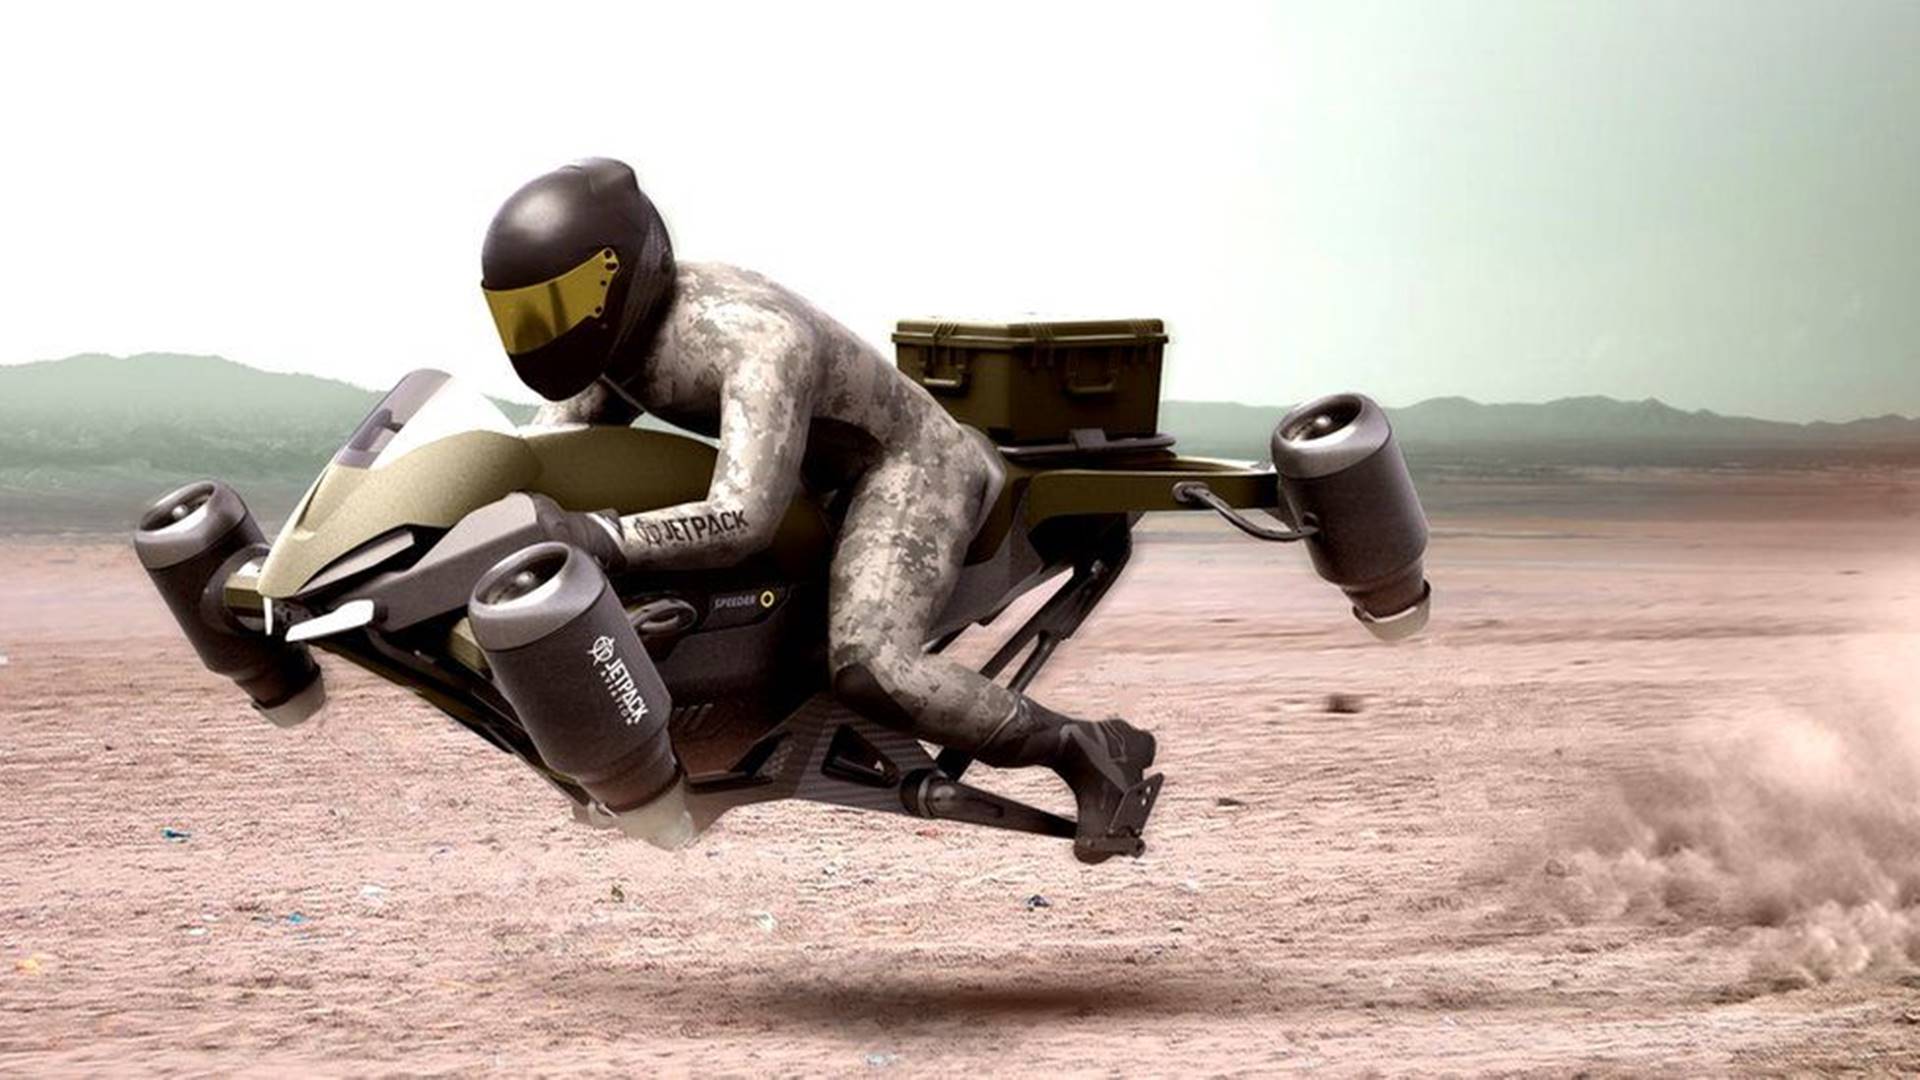 How a jetpack design helped create a flying motorbike